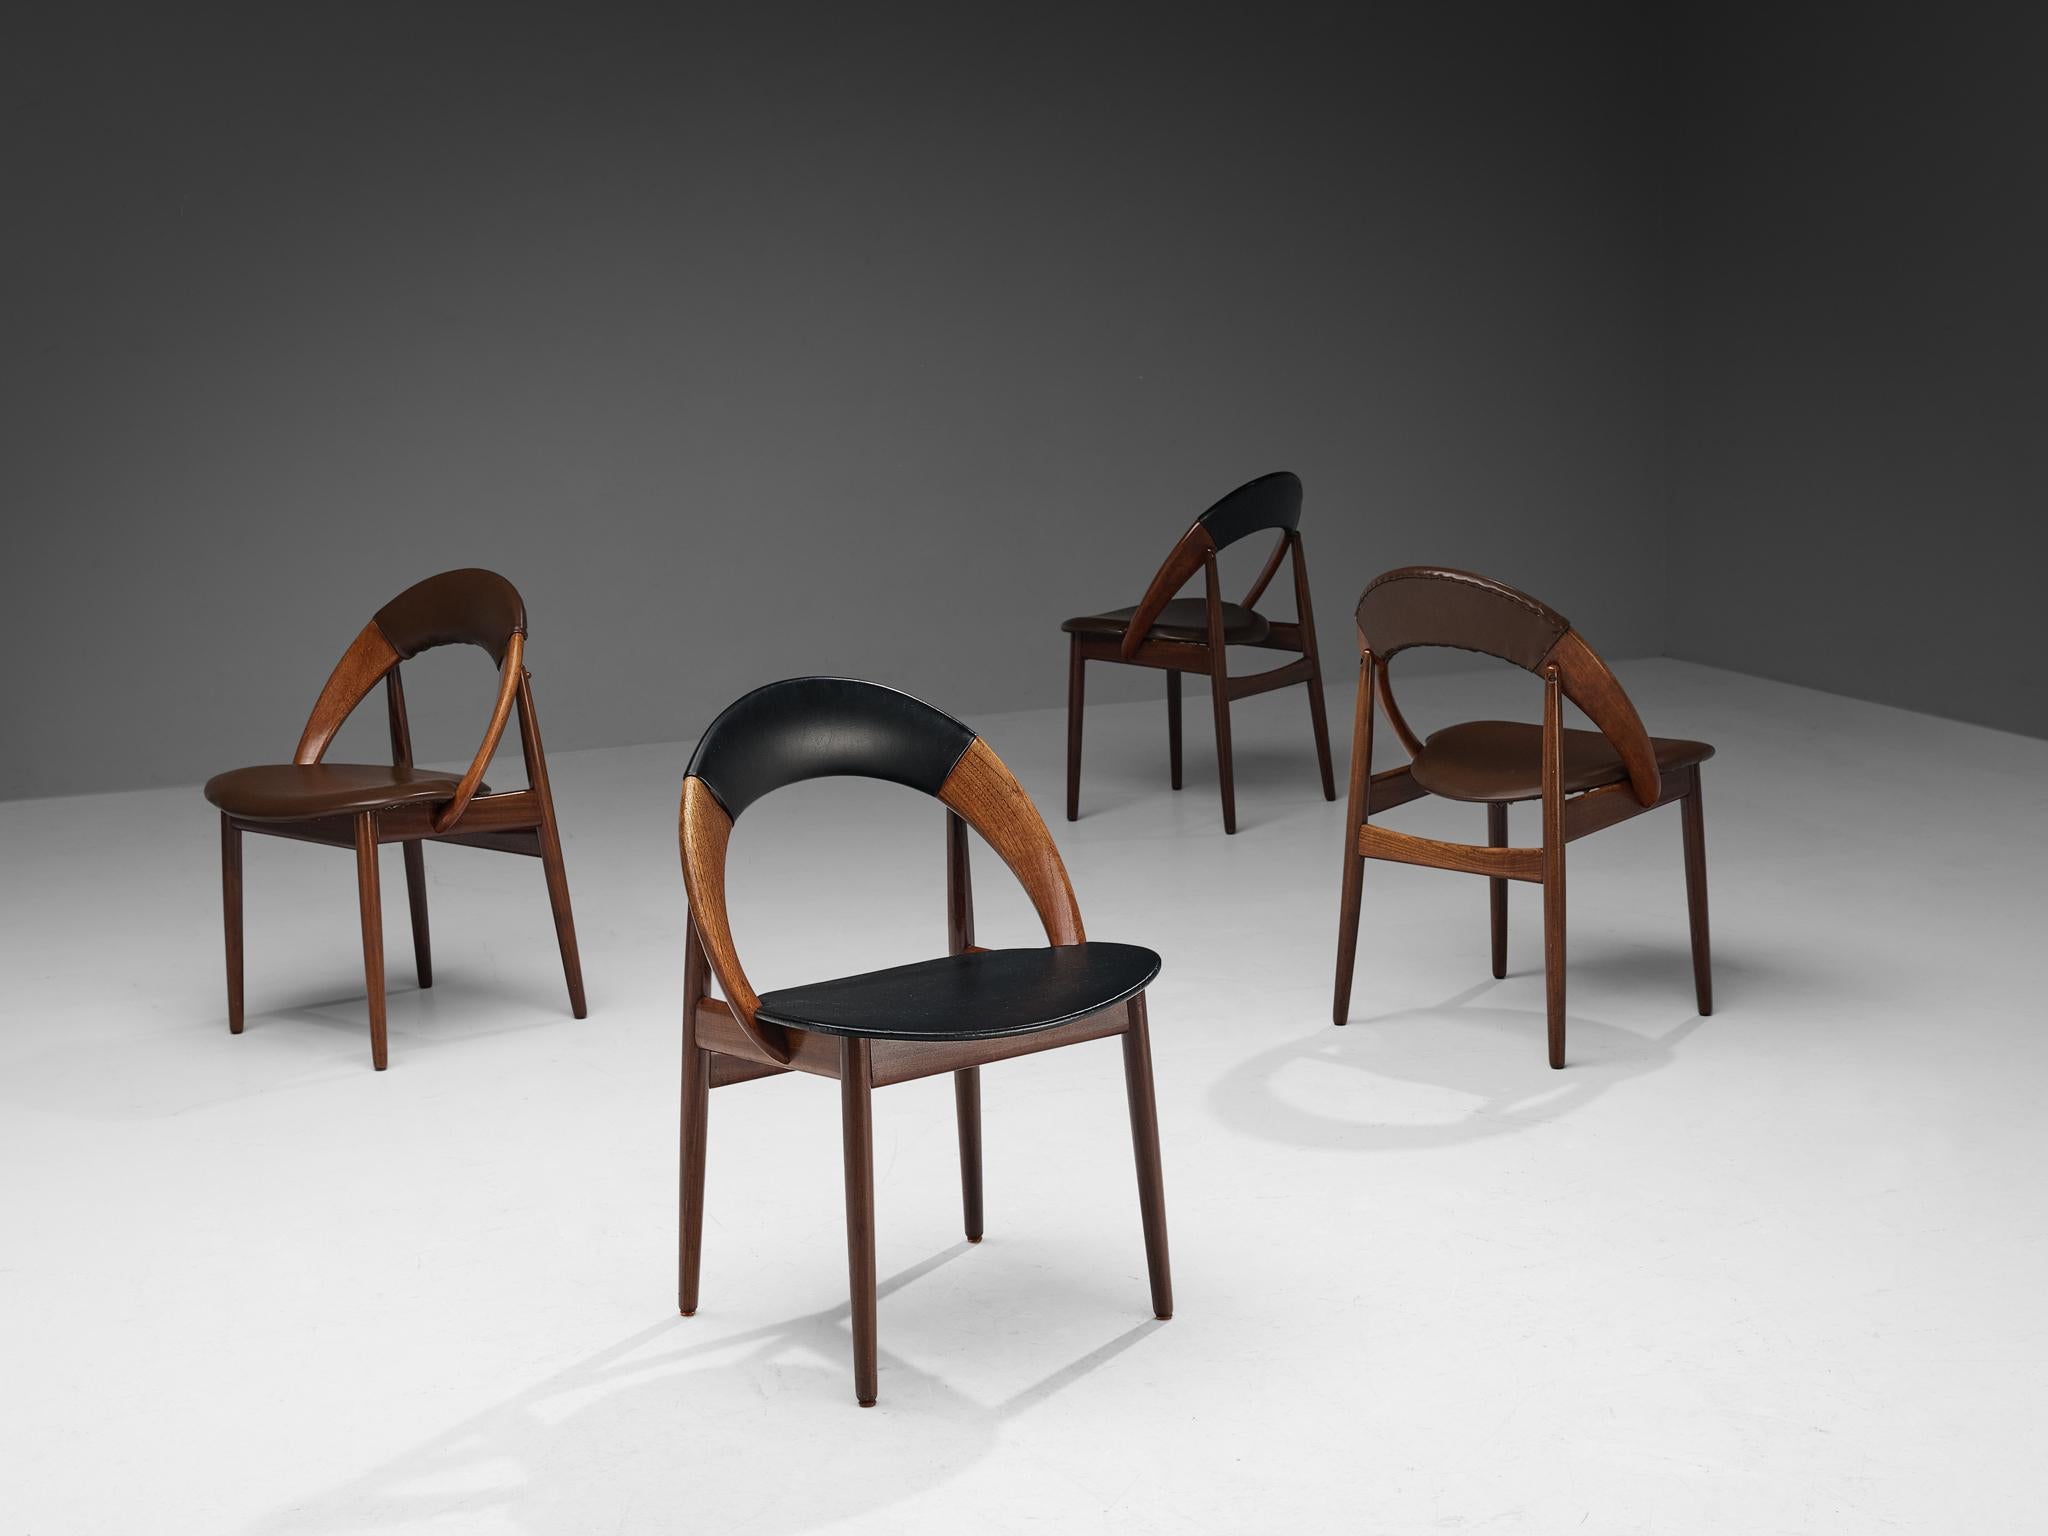 Faux Leather E. A. Johansson & A. H. Olsen Set of Six Chairs in Teak and Leatherette 